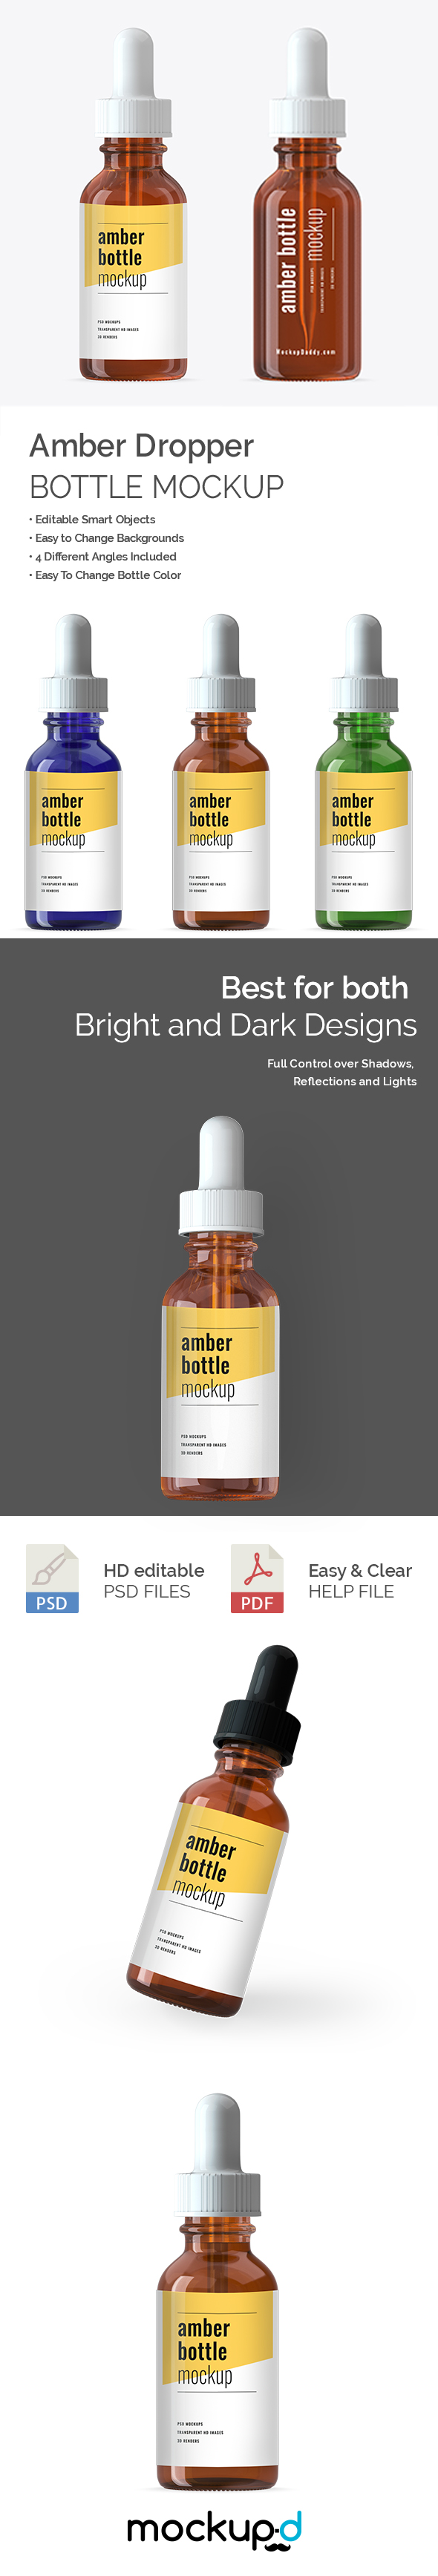 Two amber dropper bottles mockup in multicolor bottle on white and grey background.